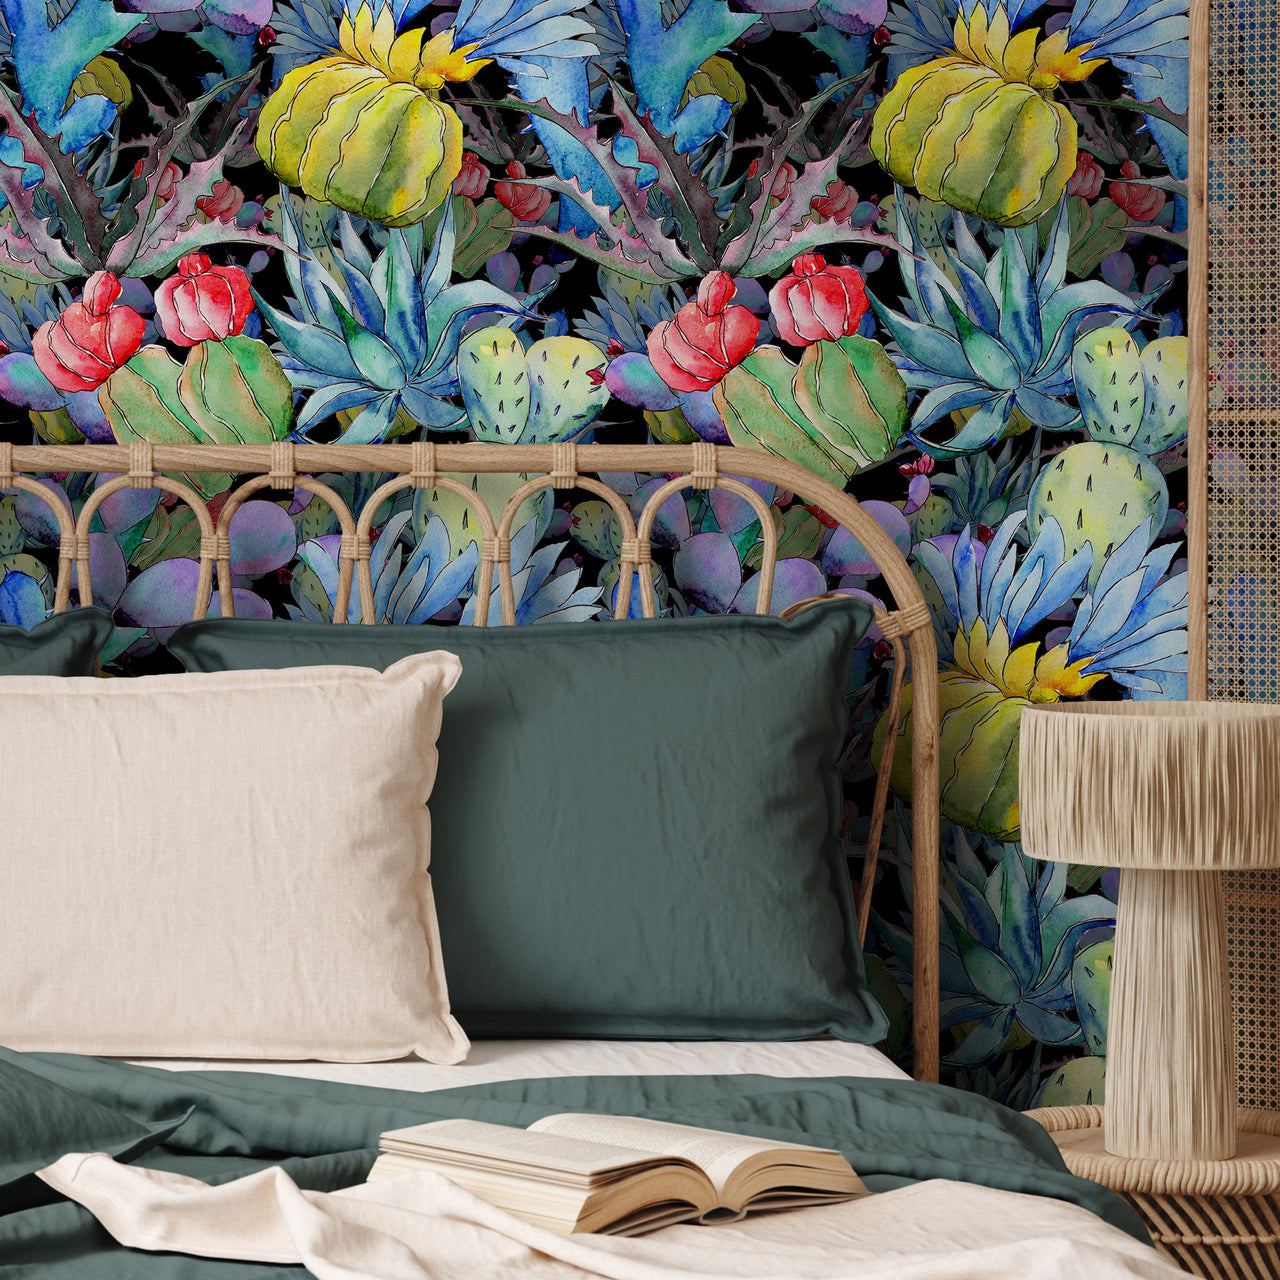 Wallpaper Peel and Stick Wallpaper Removable Wallpaper Home Decor Wall Art Wall Decor Room Decor / Colorful Floral Cactus Wallpaper - B009